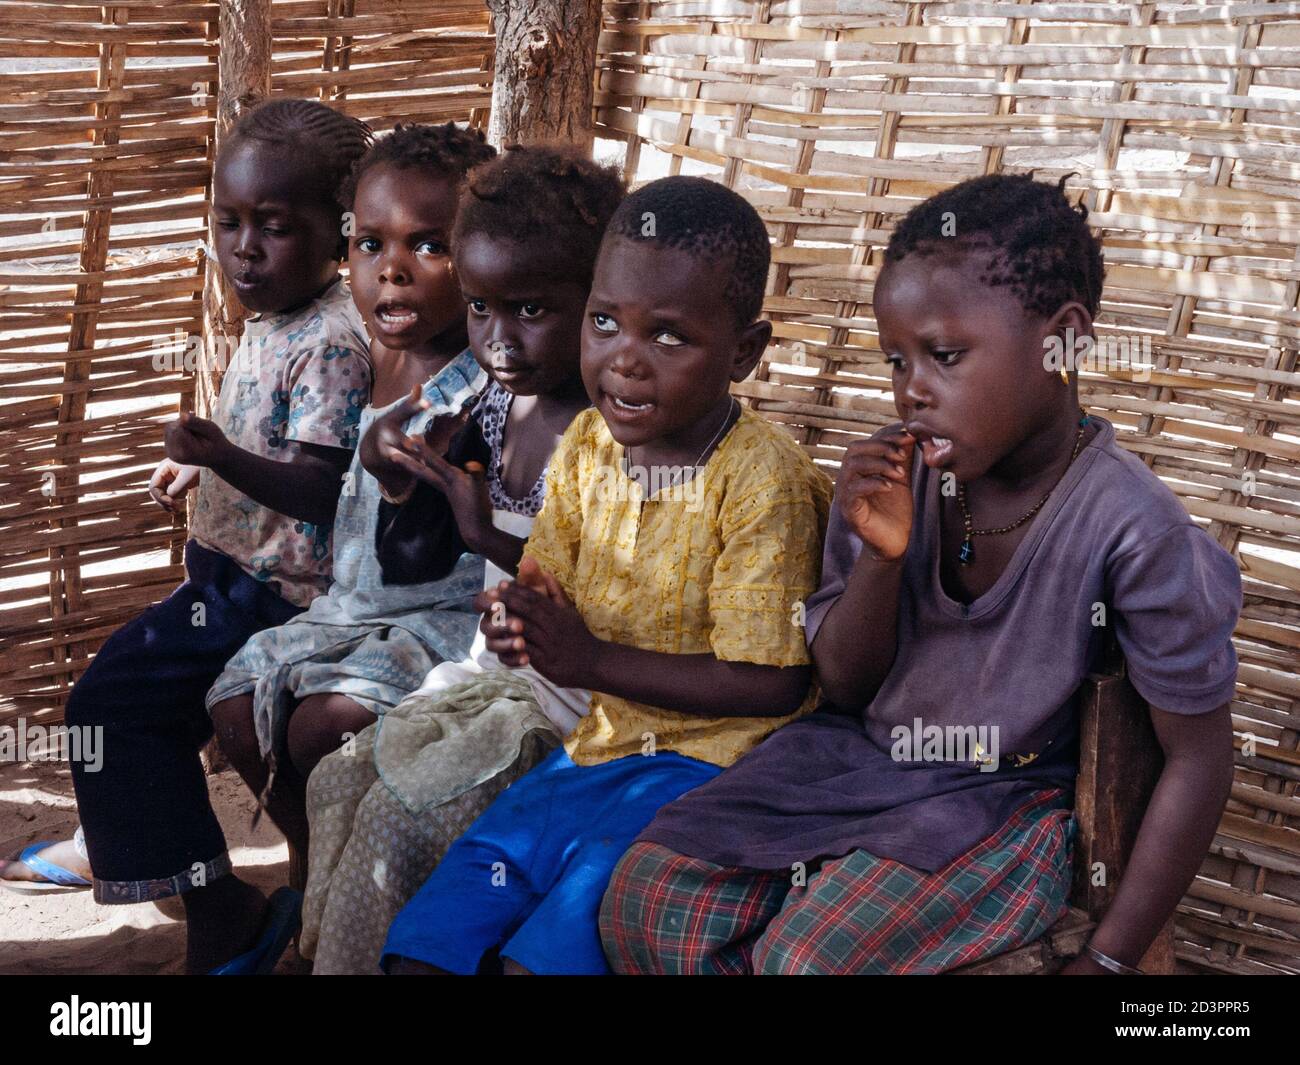 Children at The Roots Nursery School in Jufureh, The Gambia Stock Photo